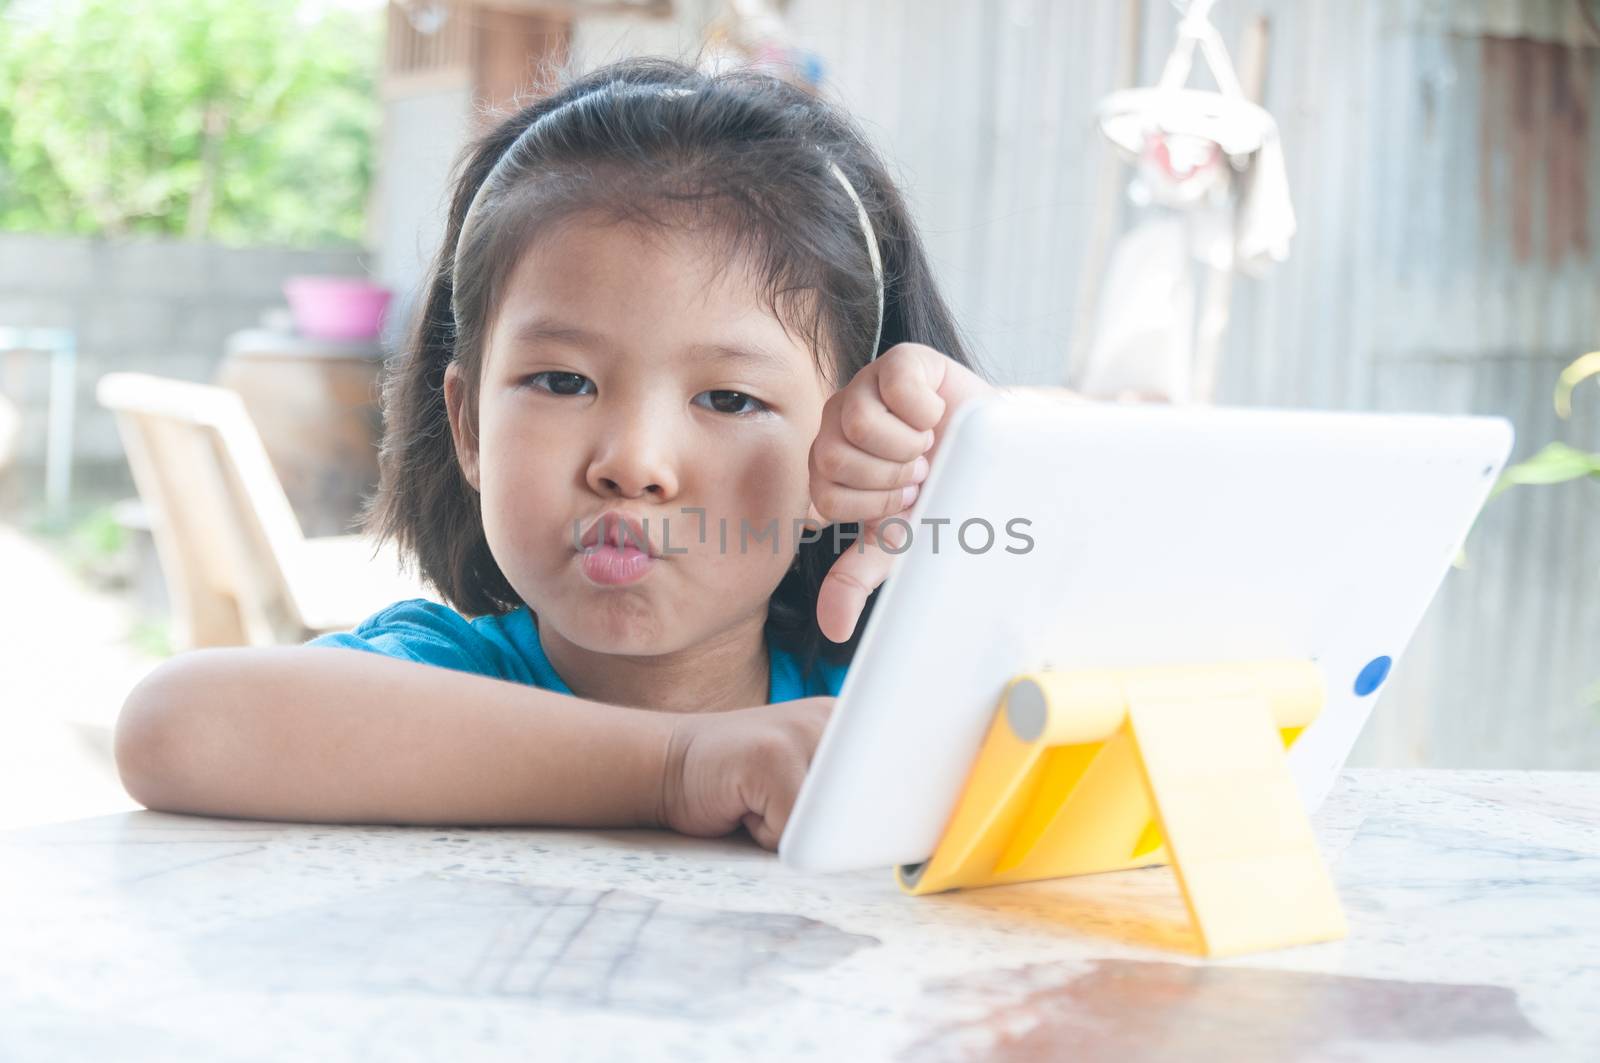 Asian Girl feeling unhappy while learning online course or playing game online on Digital Wireless Device or Tablet at home as Technology e-learning concept.